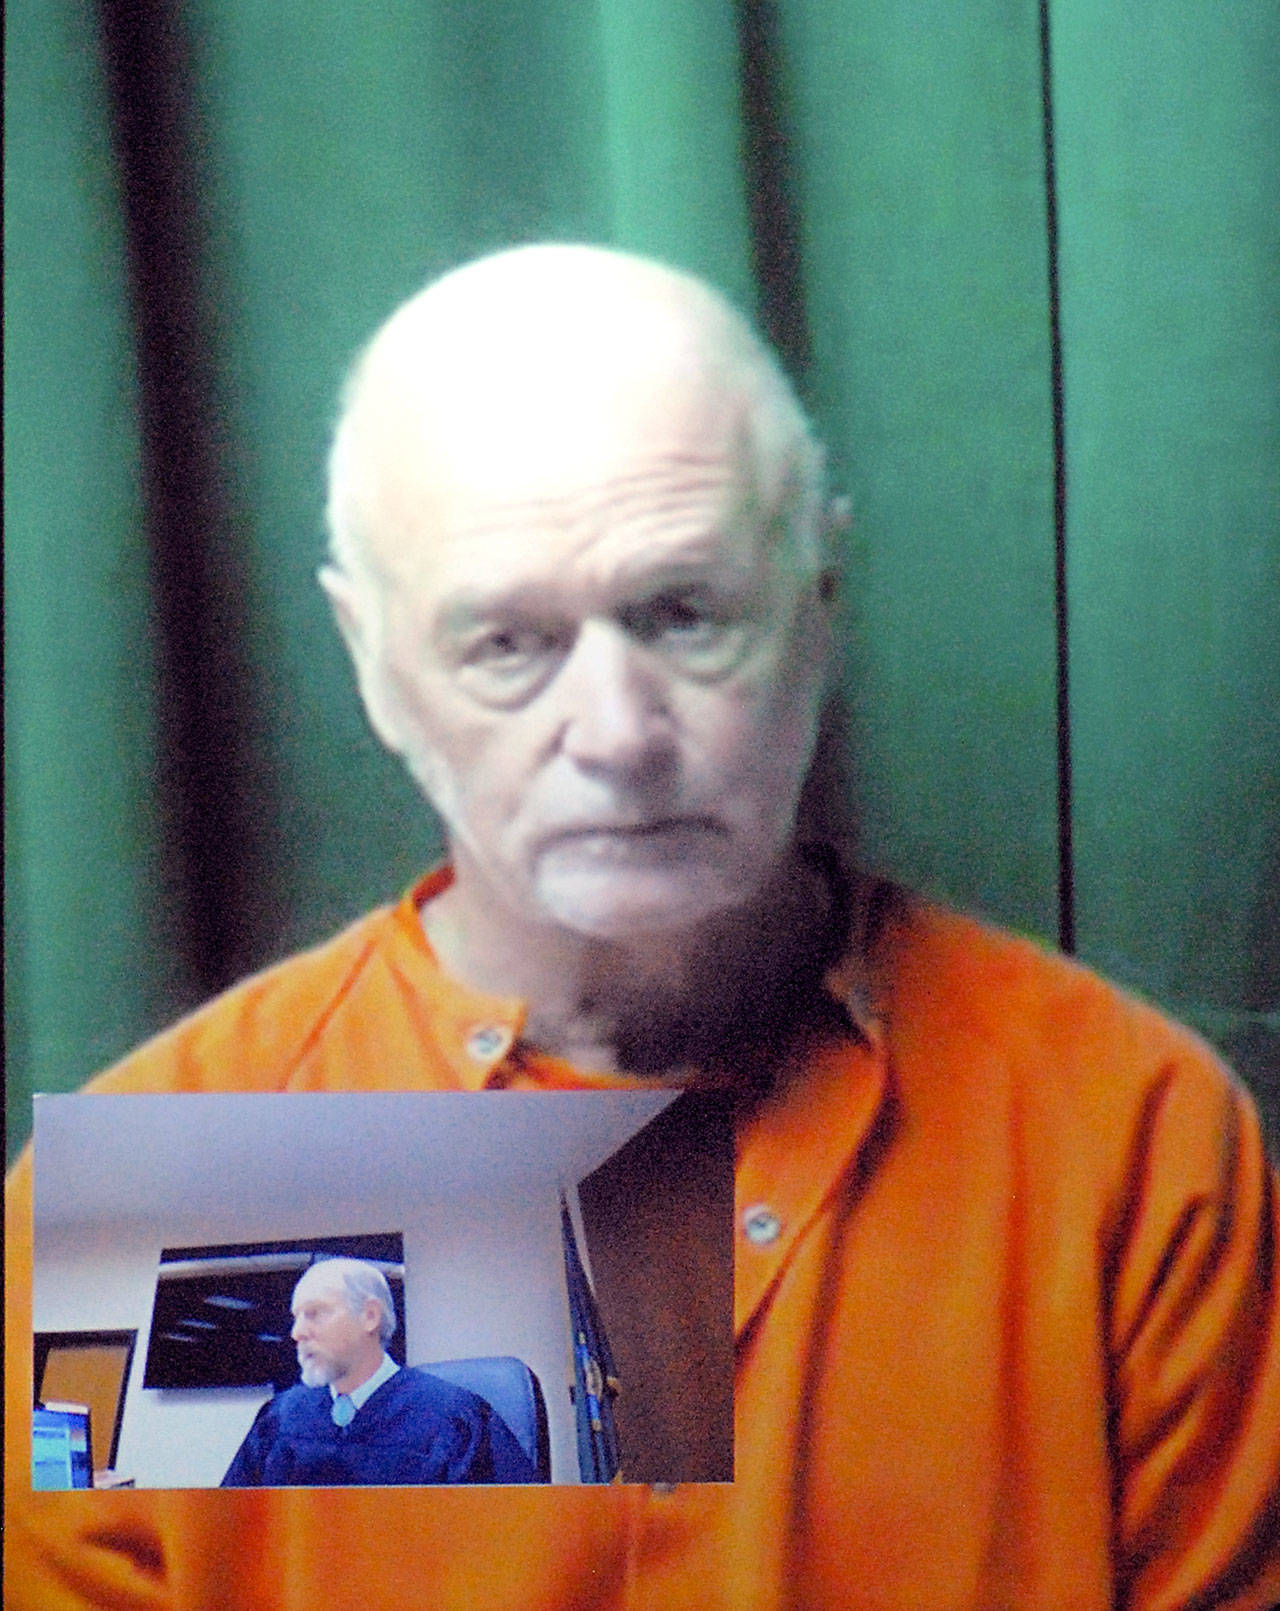 Lynn George Johnson of Sequim appears Wednesday by video link before Clallam County Superior Court Judge Brian Coughenour, shown in inset, on multiple charges of child rape and child molestation. (Keith Thorpe/Peninsula Daily News)